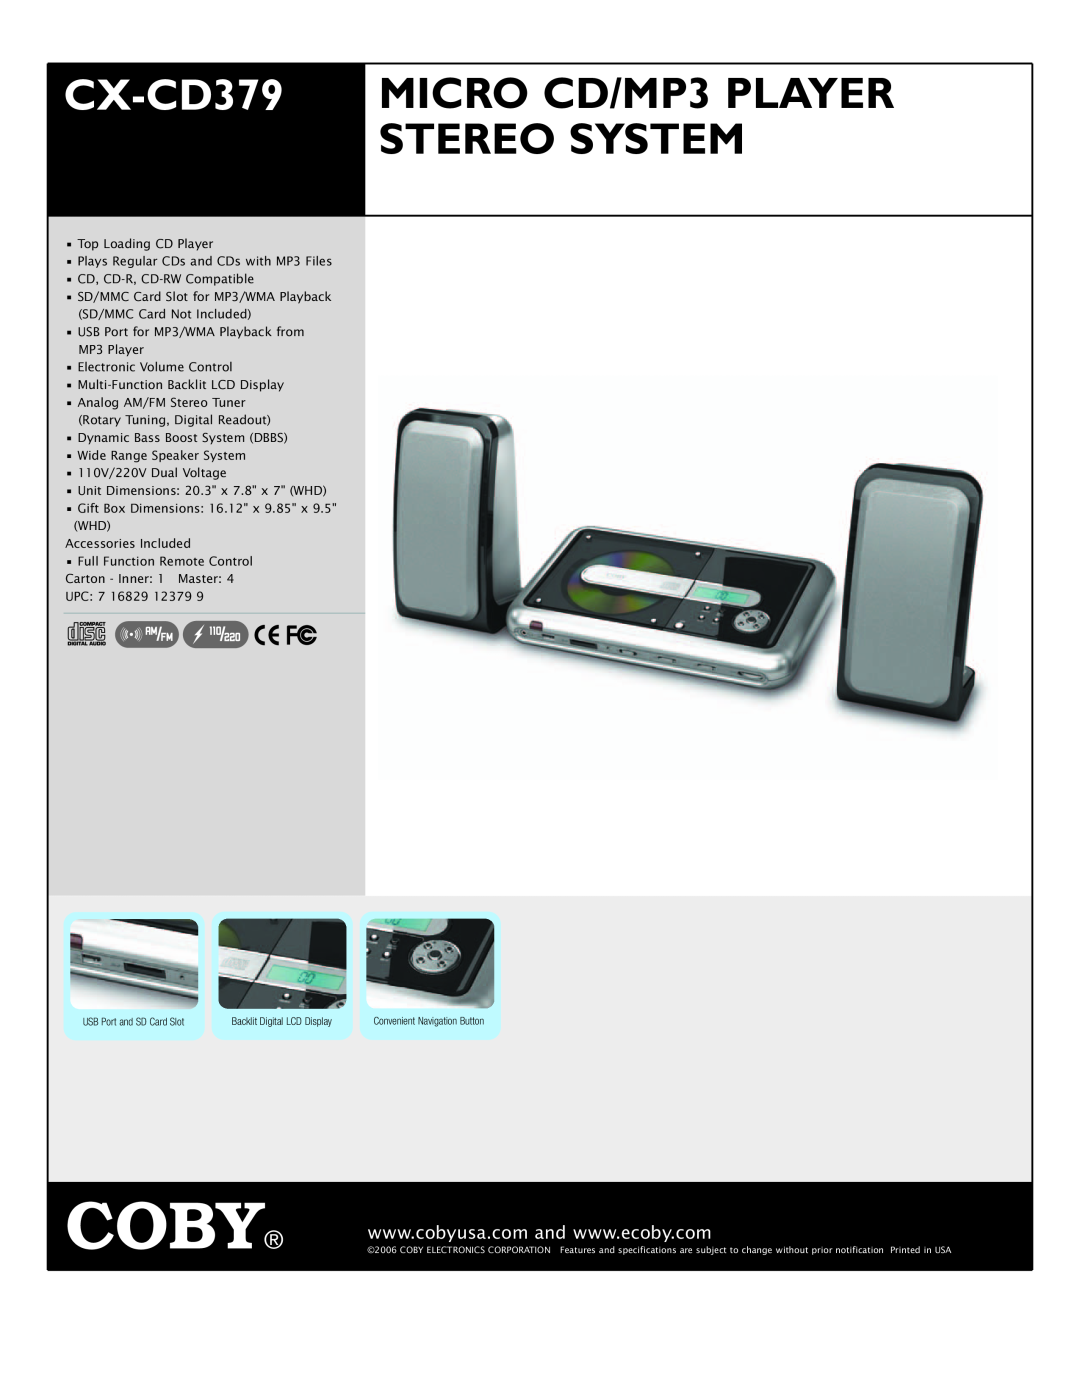 COBY electronic CX-CD379 specifications Coby, MICRO CD/MP3 PLAYER, Stereo System 